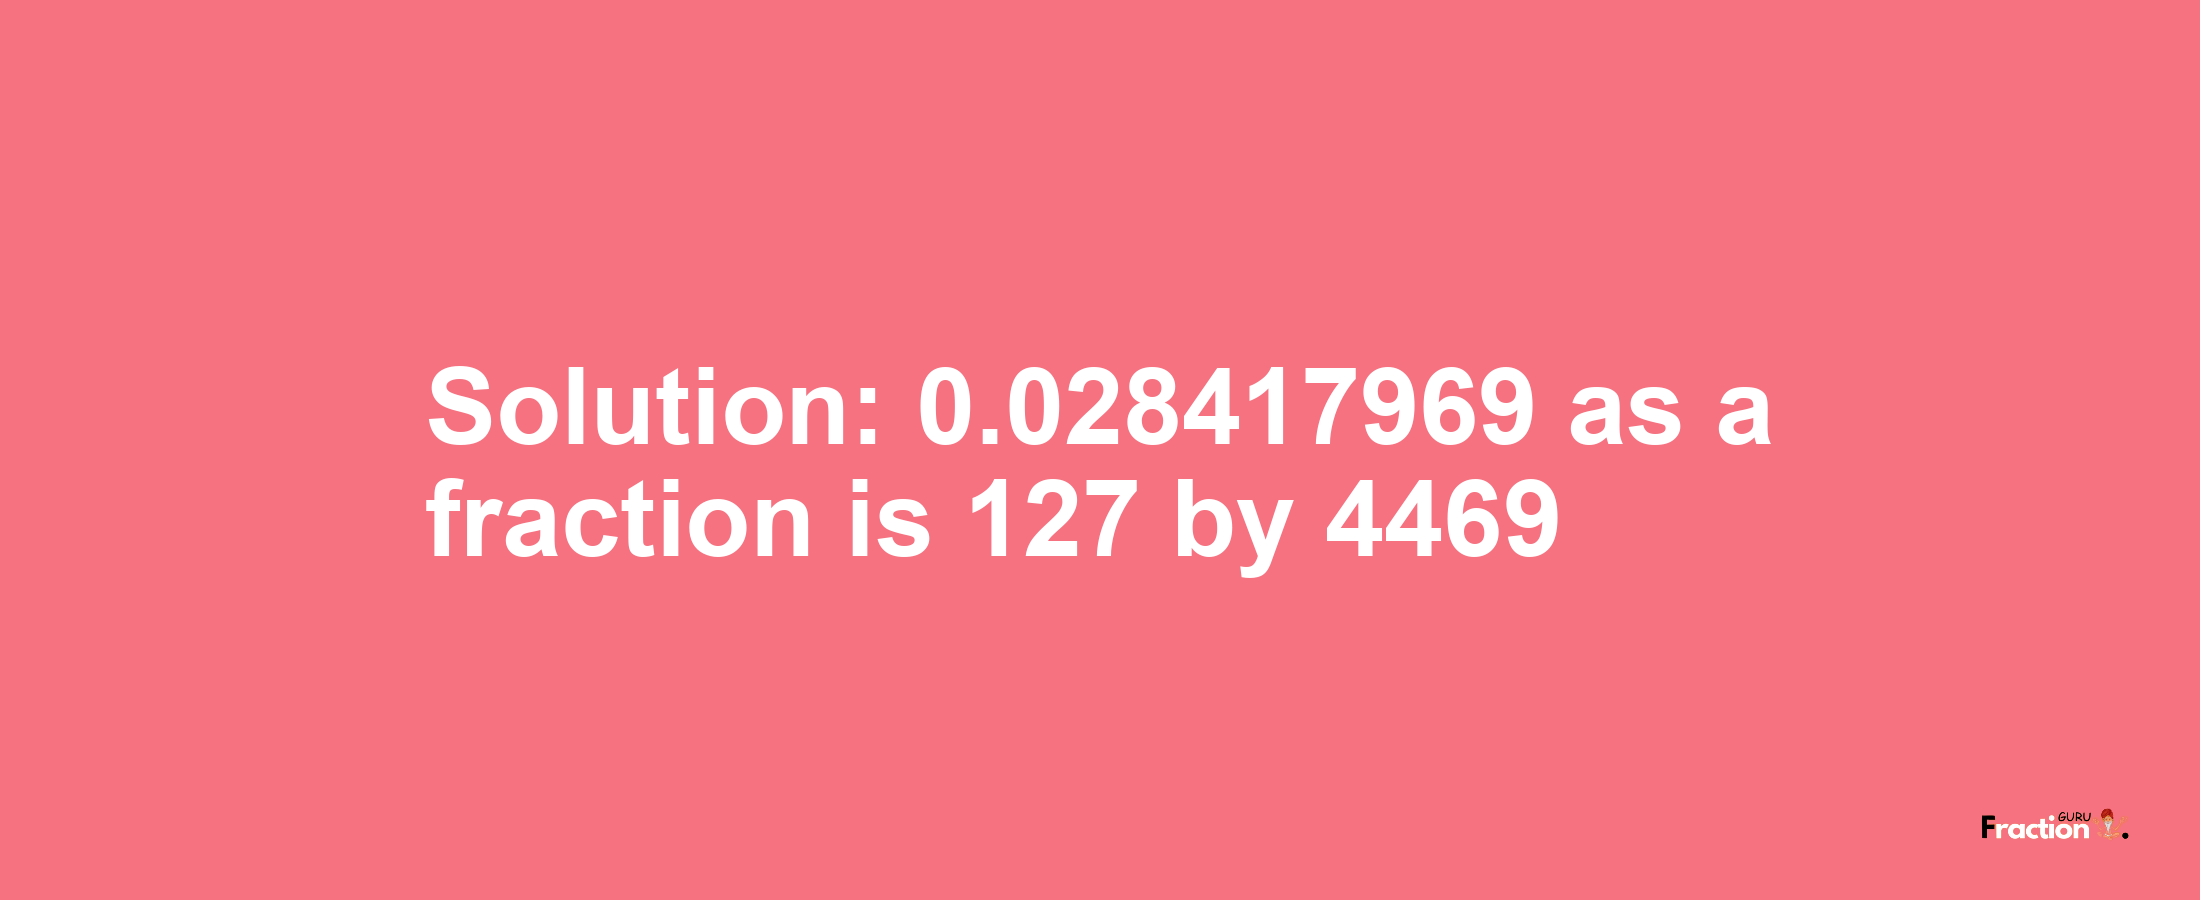 Solution:0.028417969 as a fraction is 127/4469